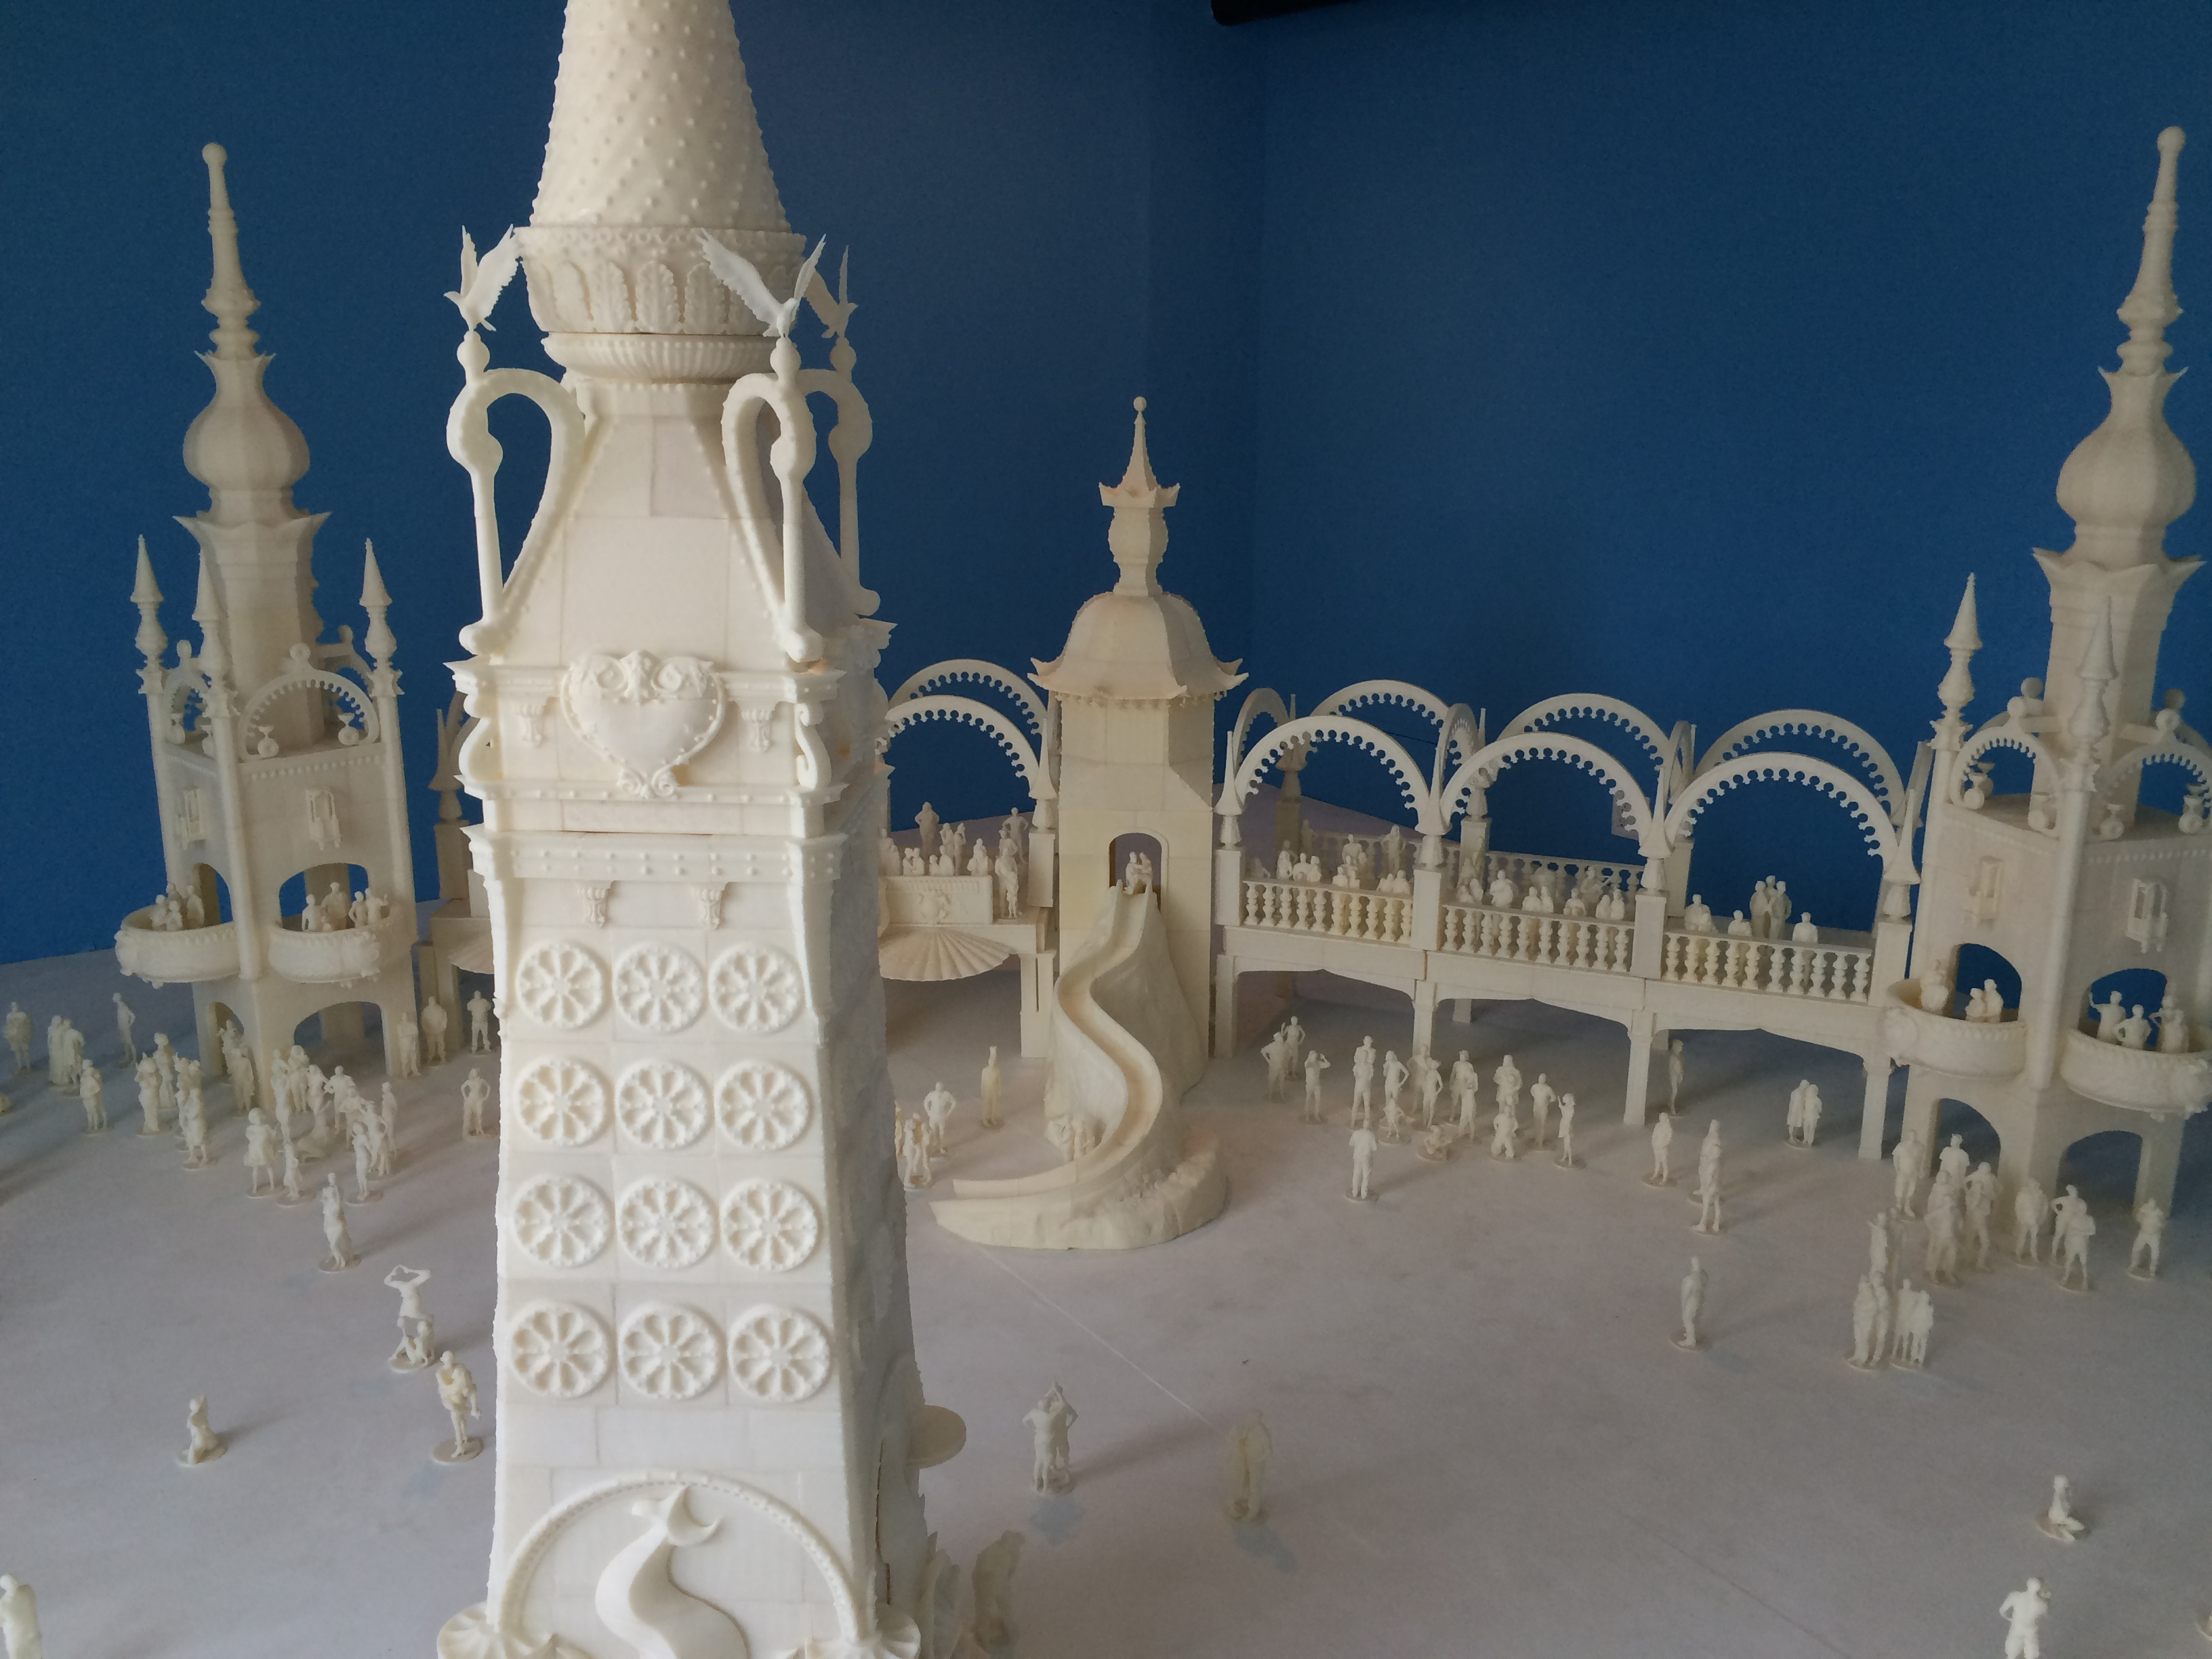 Thompson & Dundy's Luna Park: 3D Printed by the Great Fredini